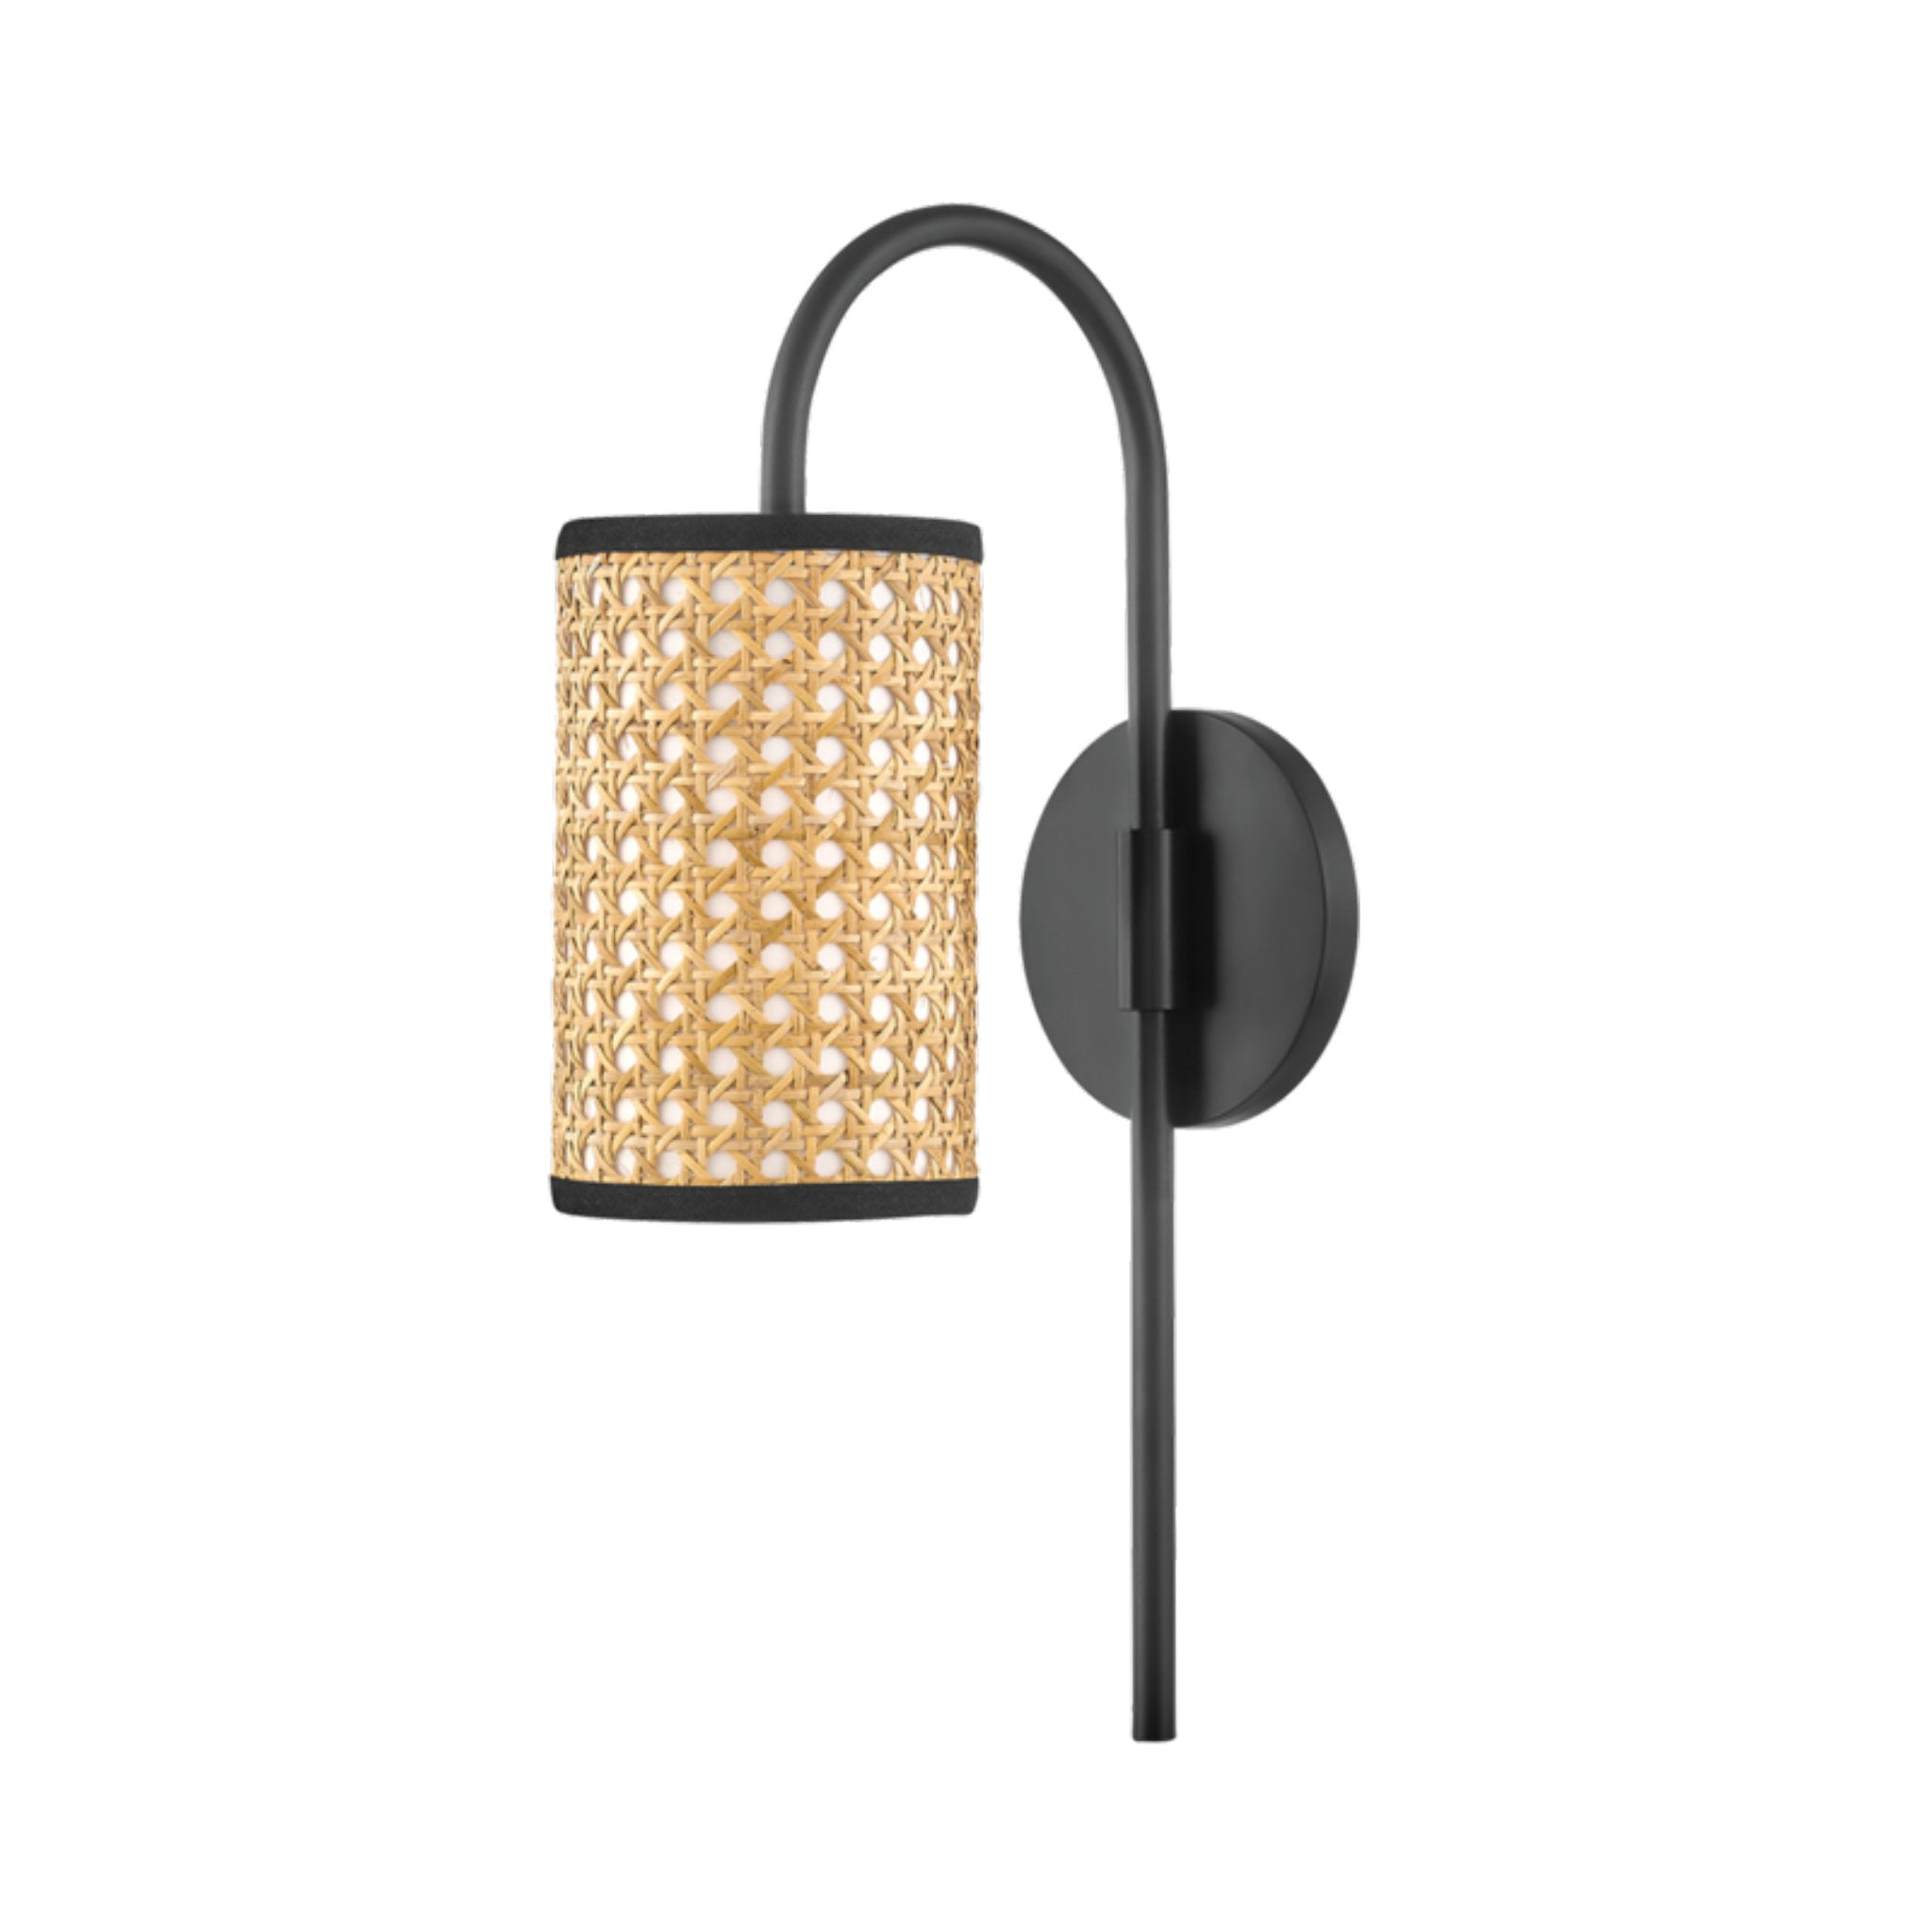 Dolores 1 Light Wall Sconce in Soft Black